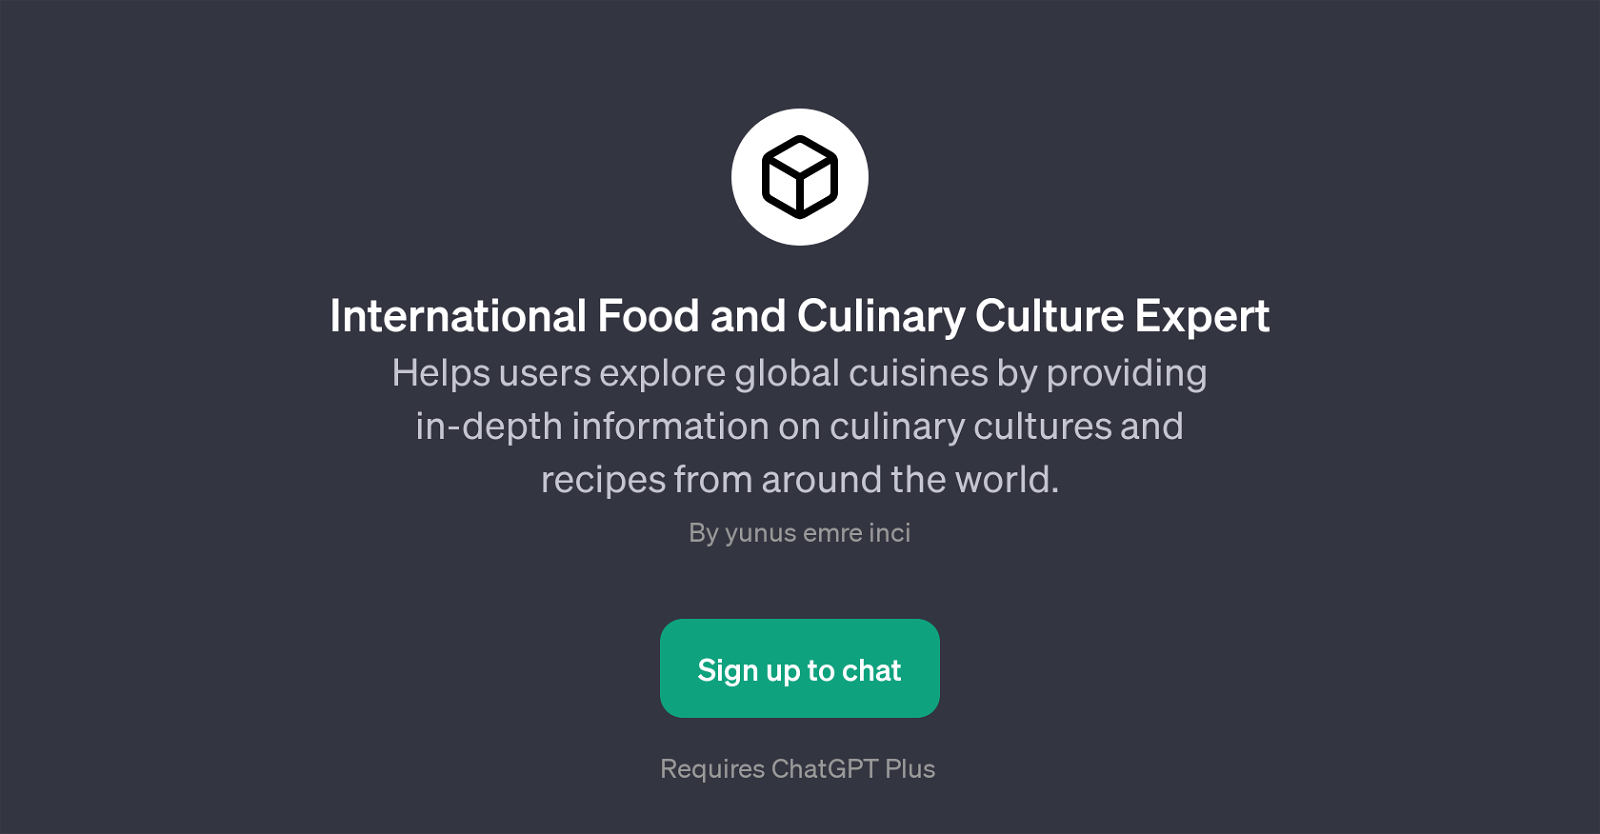 International Food and Culinary Culture Expert website